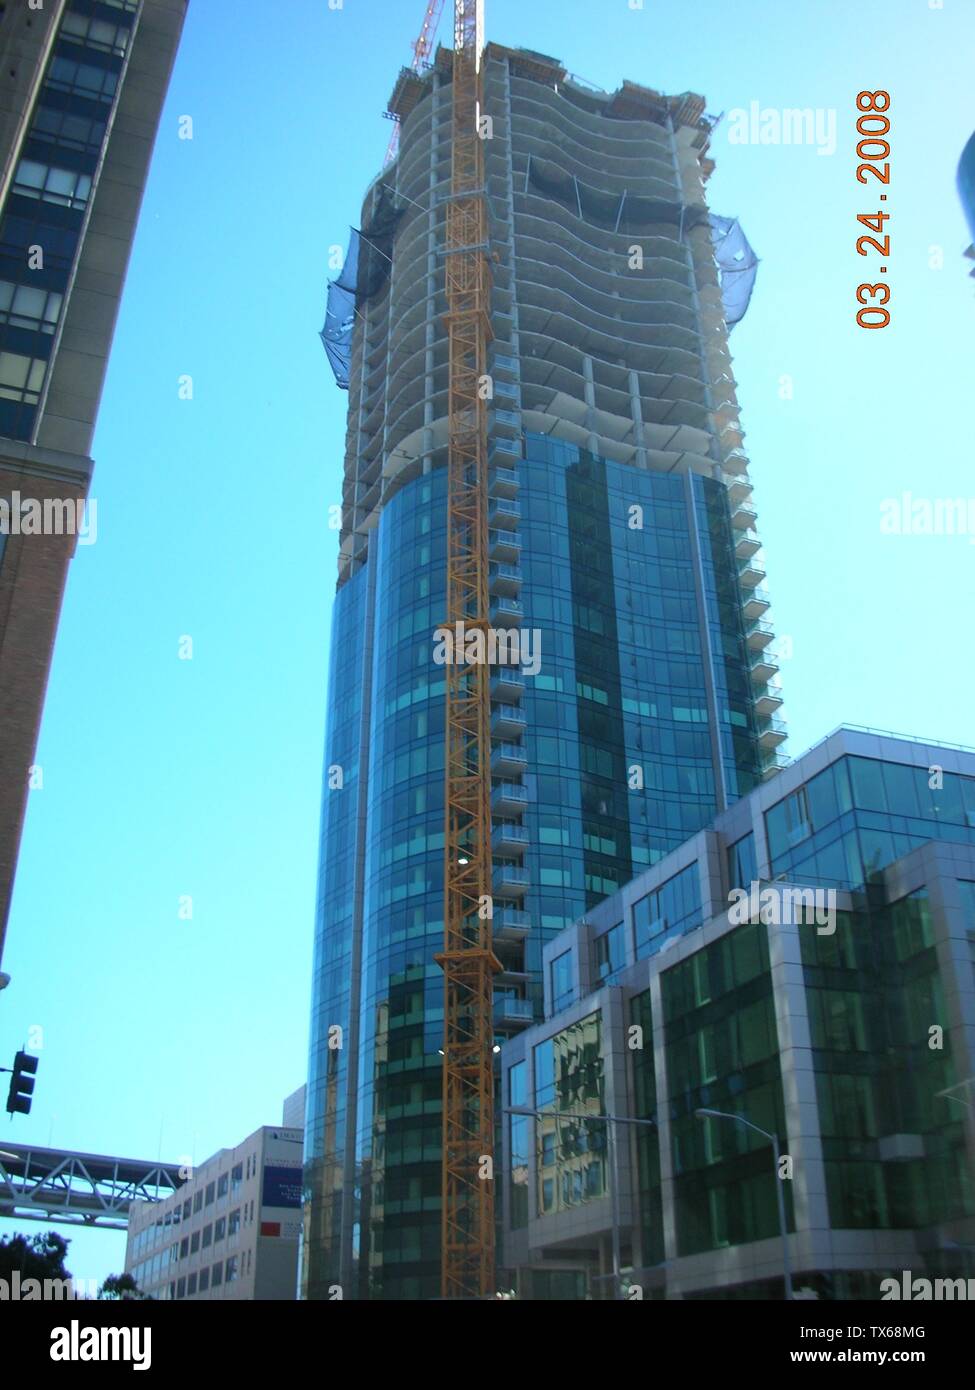 The Infinity (300 Spear Street) tower I under construction in San Francisco. The Spear Street midrise is on the bottom left.; 24 March 2008; Own work (Original caption:  I created this work entirely by myself) Transferred from en.pedia to Commons by User:Magnus Manske using CommonsHelper.; Cheers. Trance addict - Armin van Buuren - Oceanlab; Stock Photo